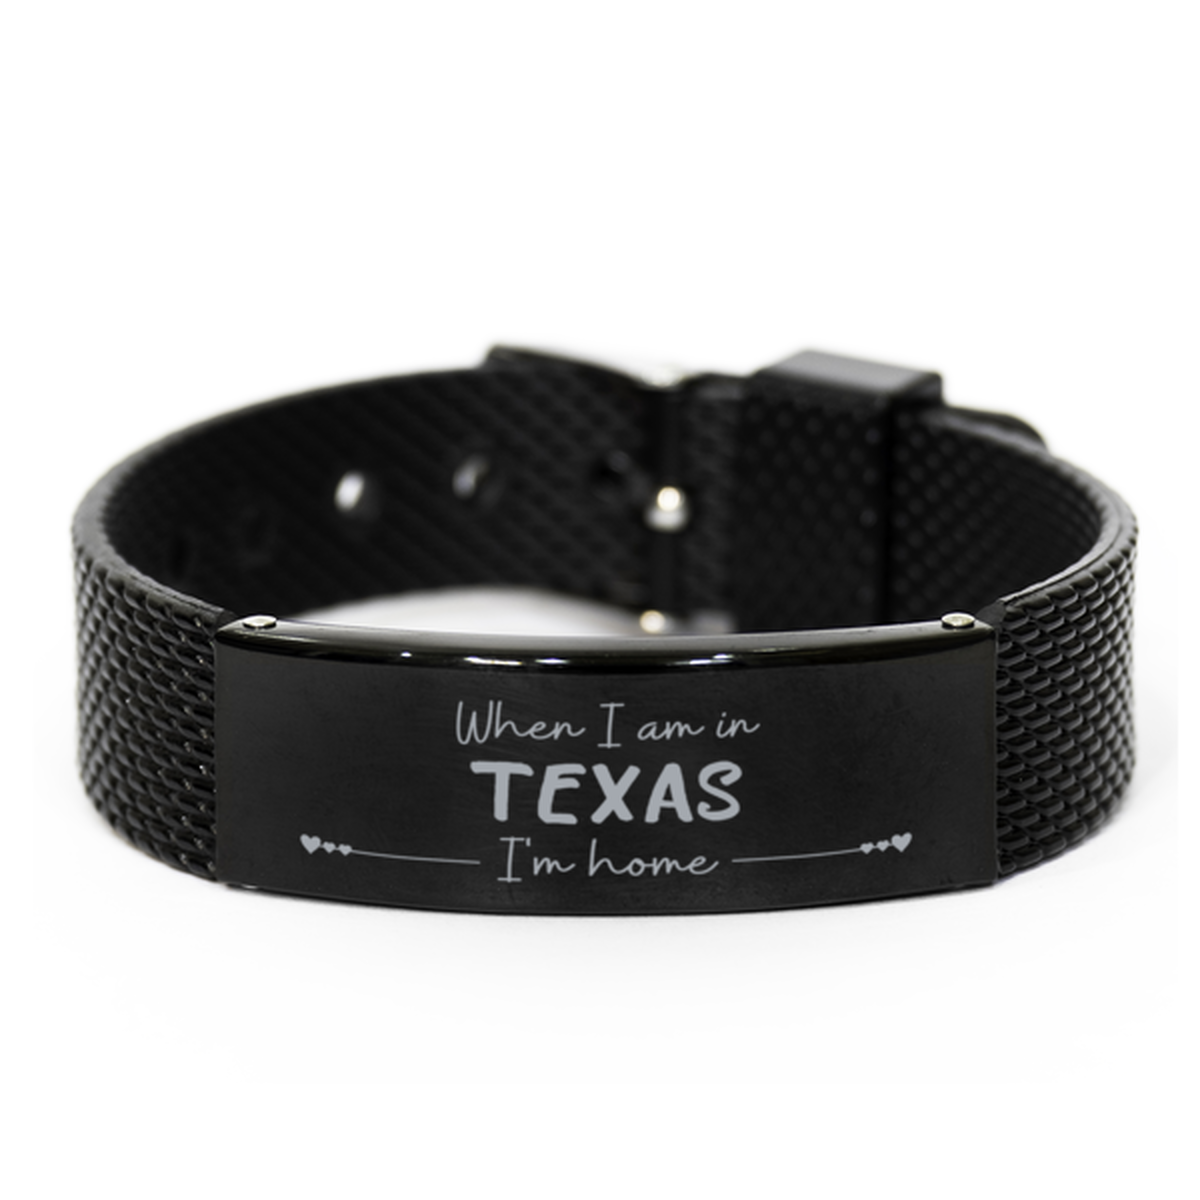 When I am in Texas I'm home Black Shark Mesh Bracelet, Cheap Gifts For Texas, State Texas Birthday Gifts for Friends Coworker